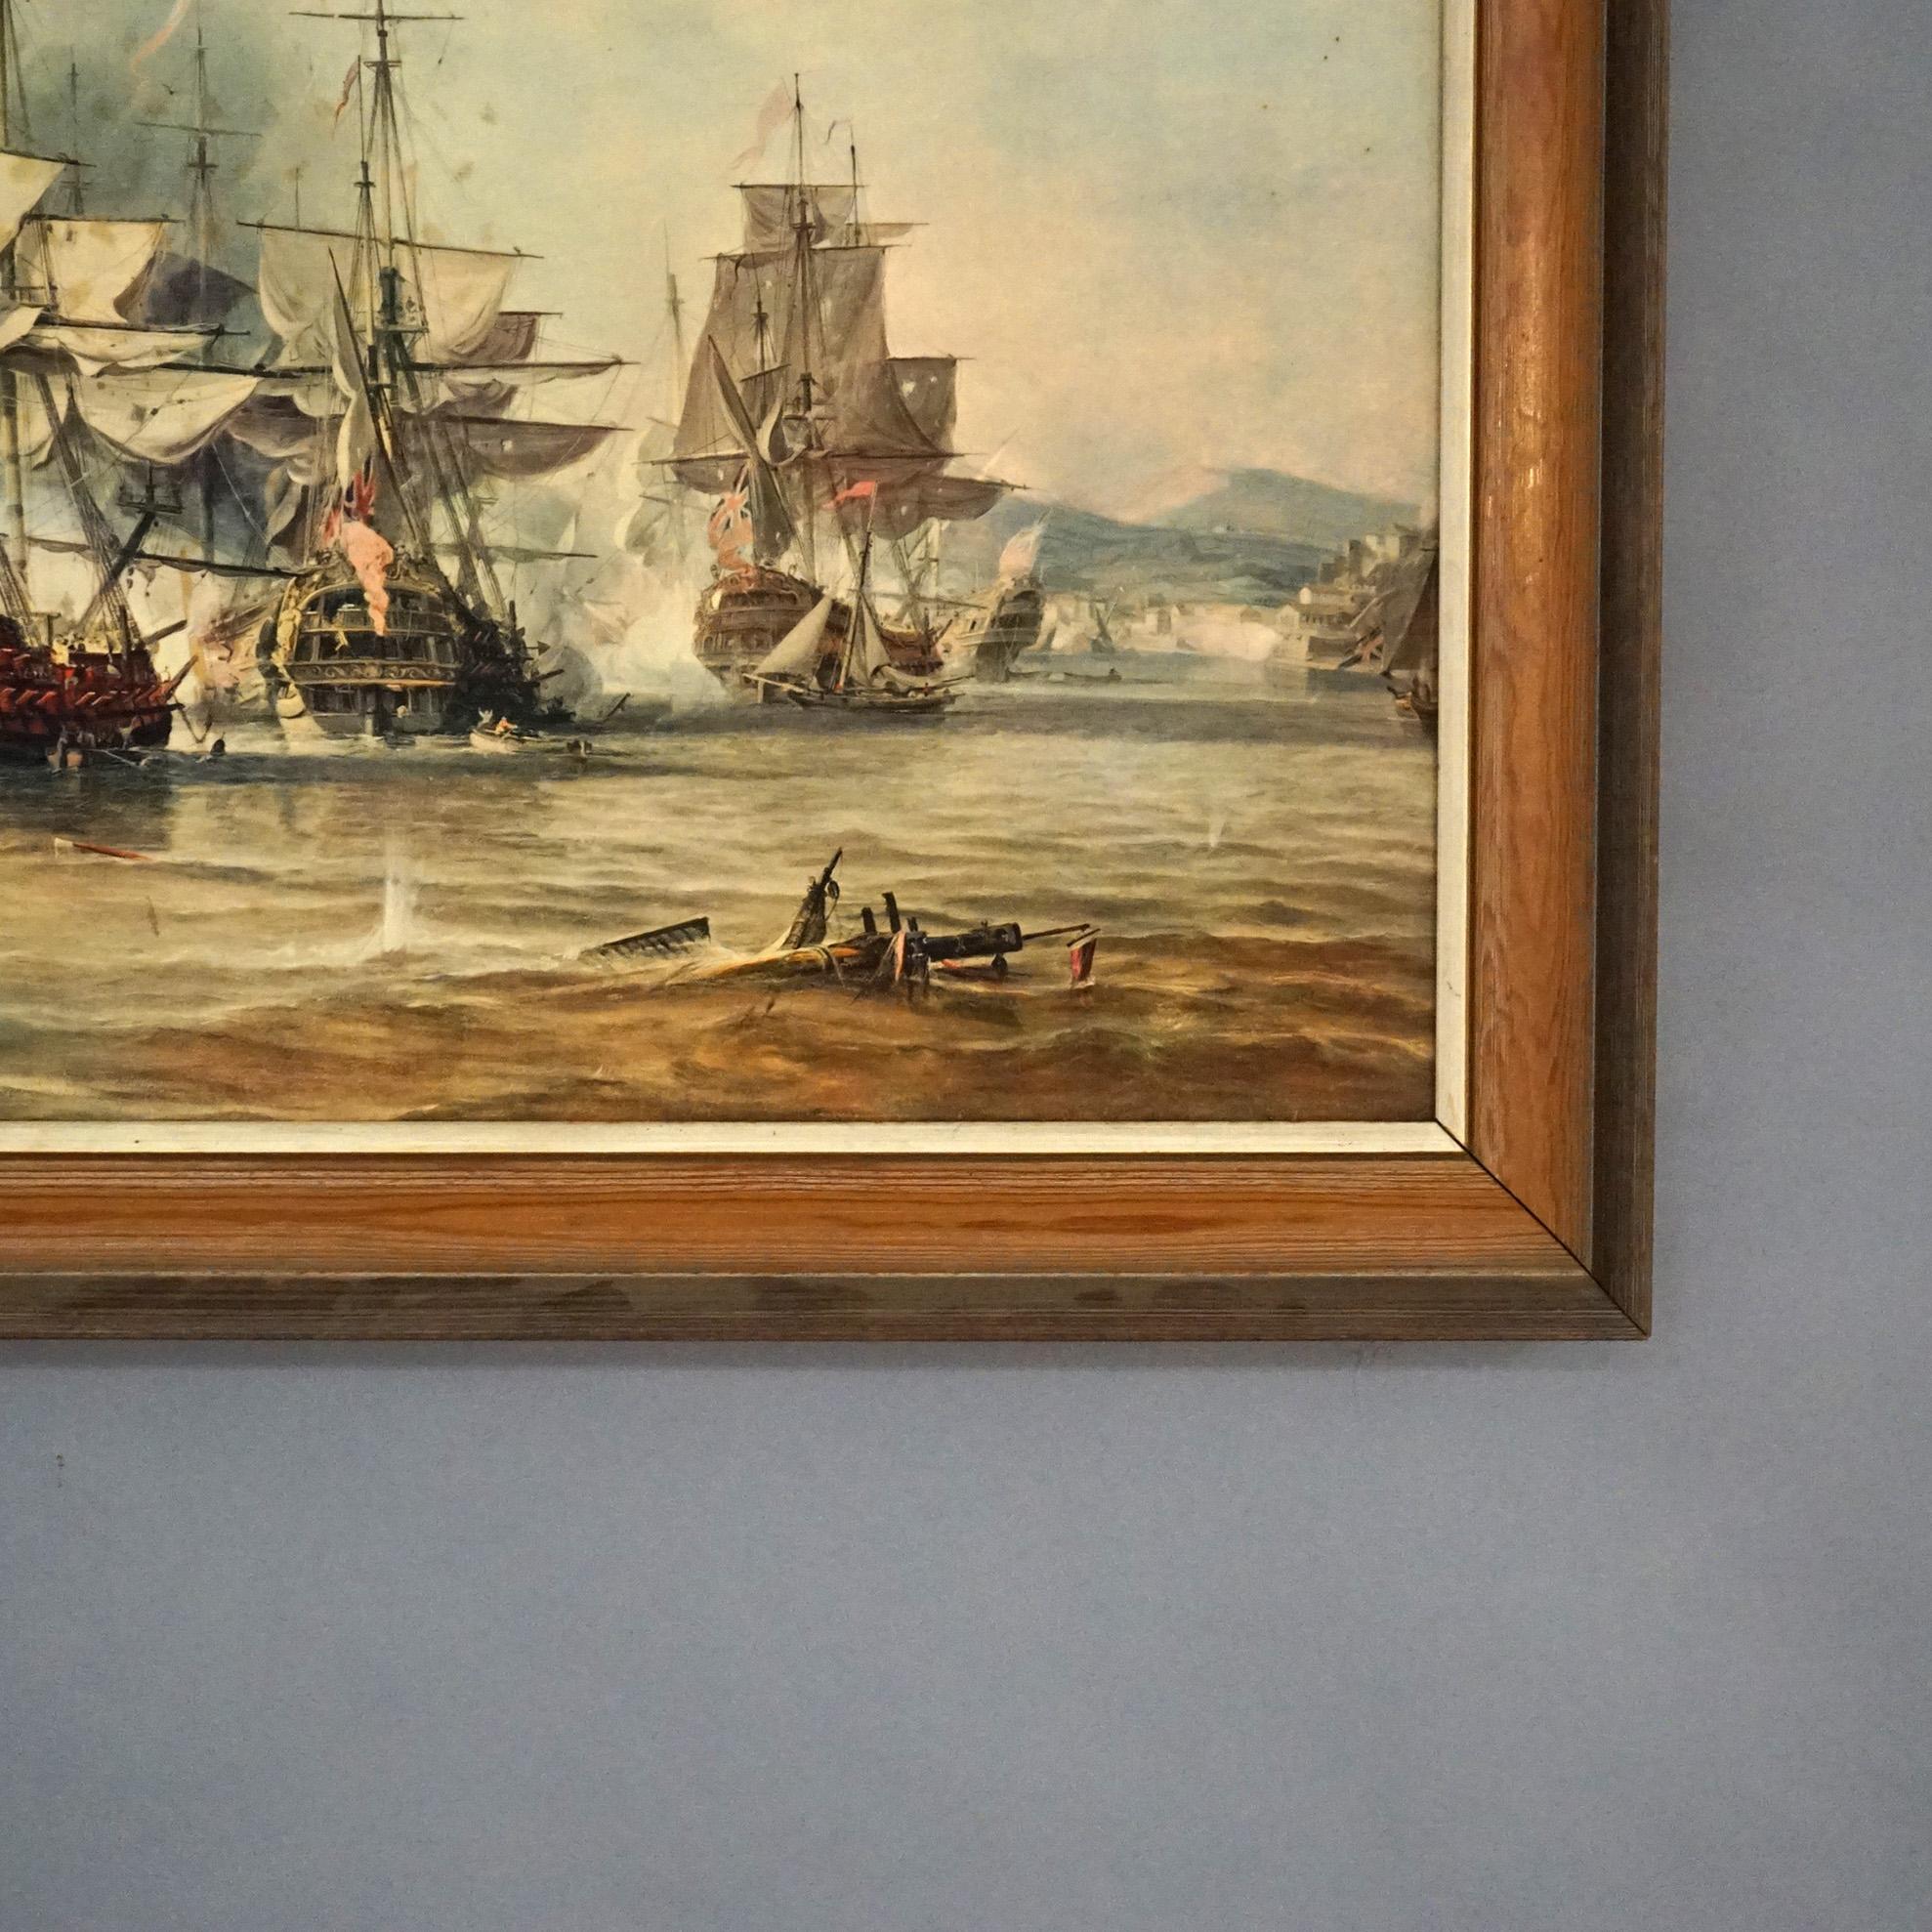 20th Century Mid Century Modern Seascape Print with Tall Mast Ships after Chambers C1950’s For Sale